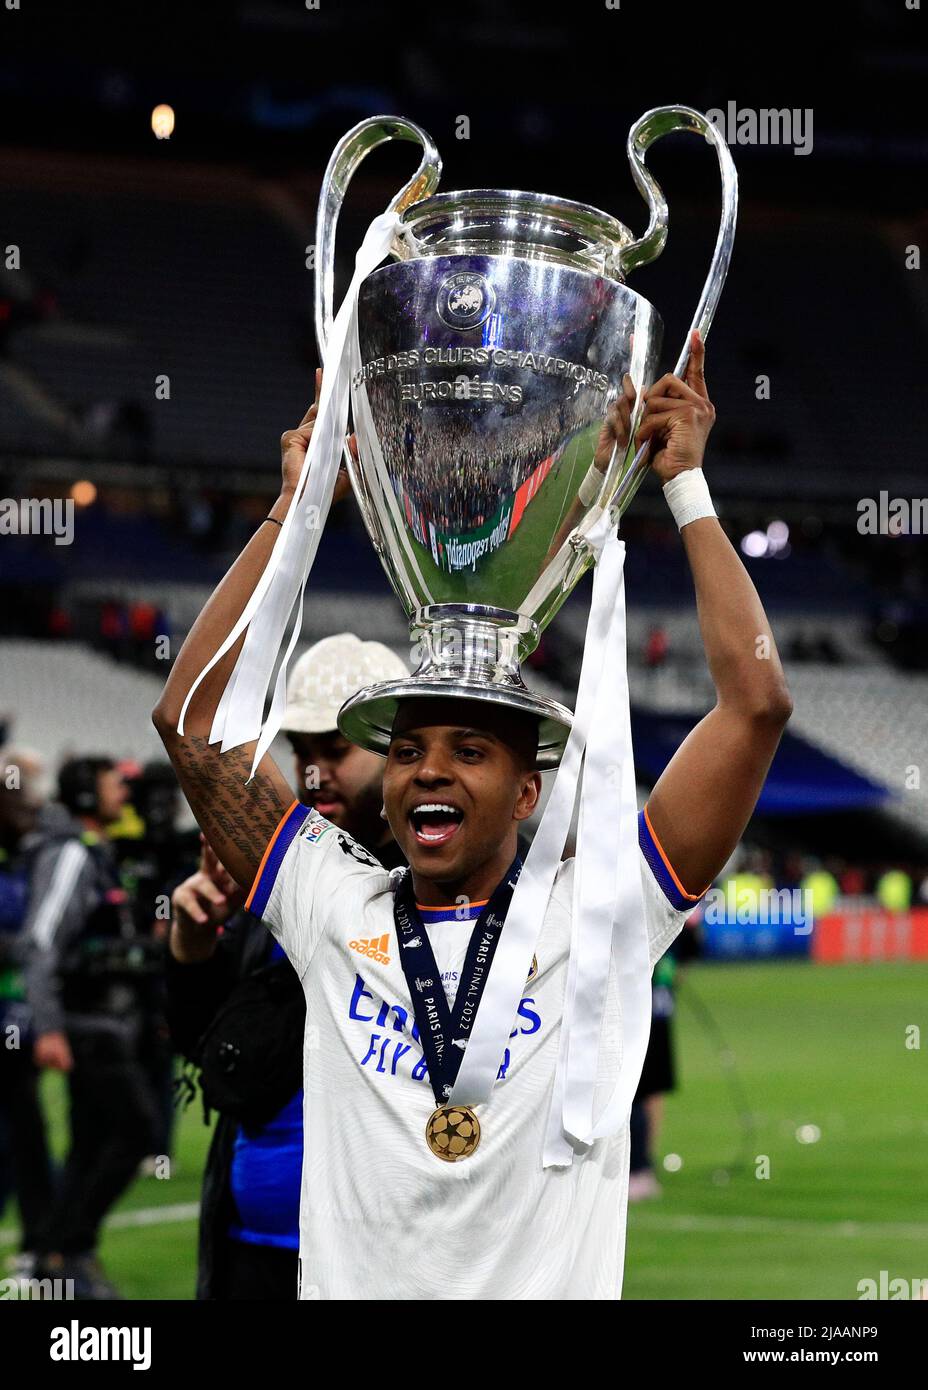 28th May 2022; Stade de France stadium, Saint-Denis, Paris, France. Champions  League football final between Liverpool FC and Real Madrid; Rodrygo of Real  Madrid lifts the Champions League trophy Stock Photo -